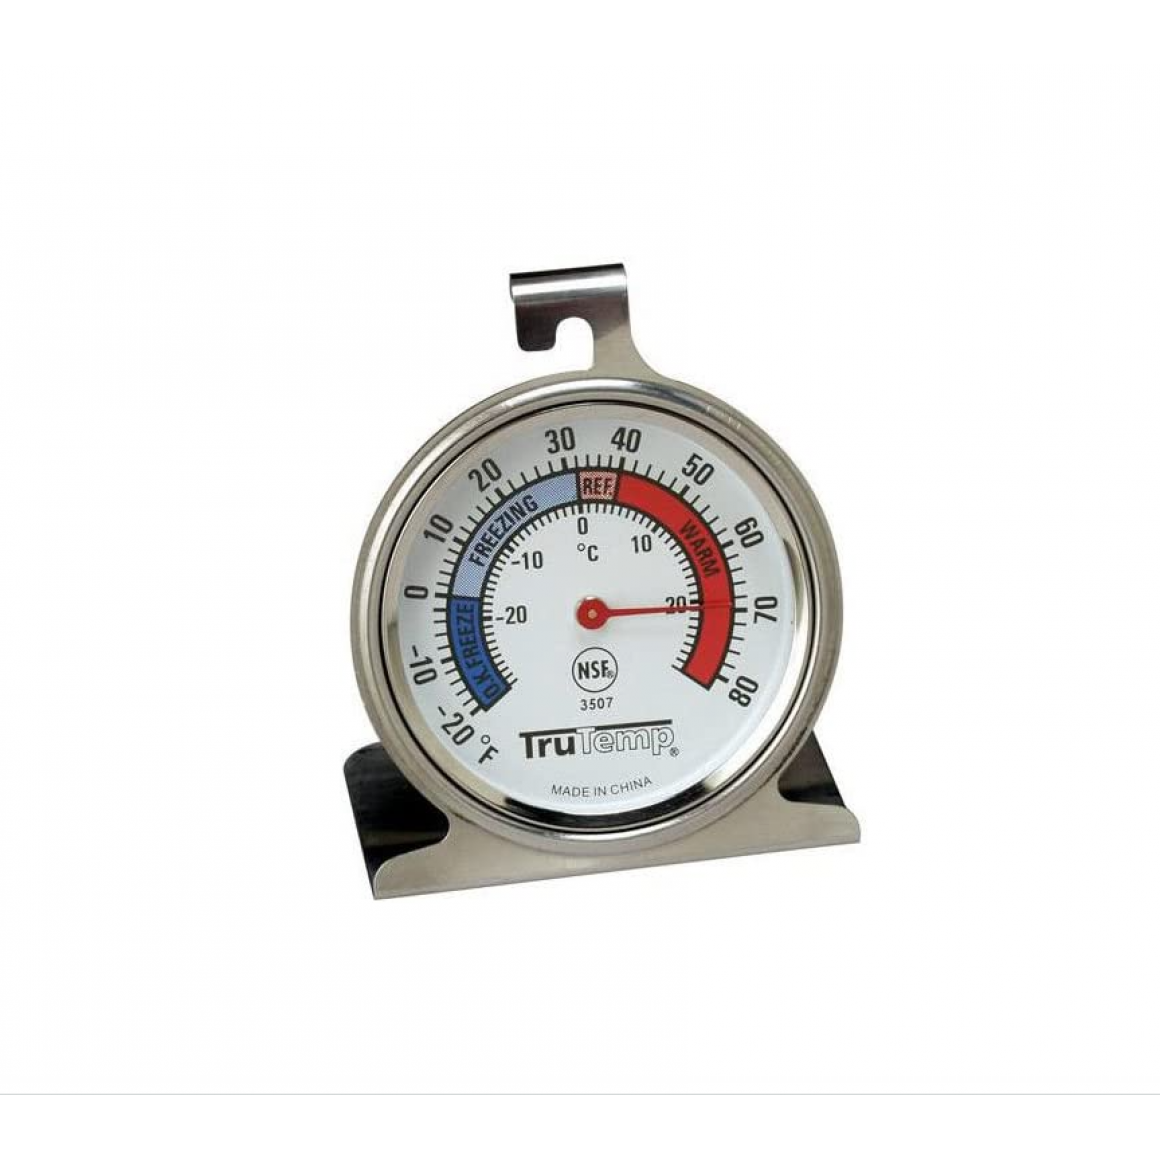 Refrig/Freezer dial thermometer